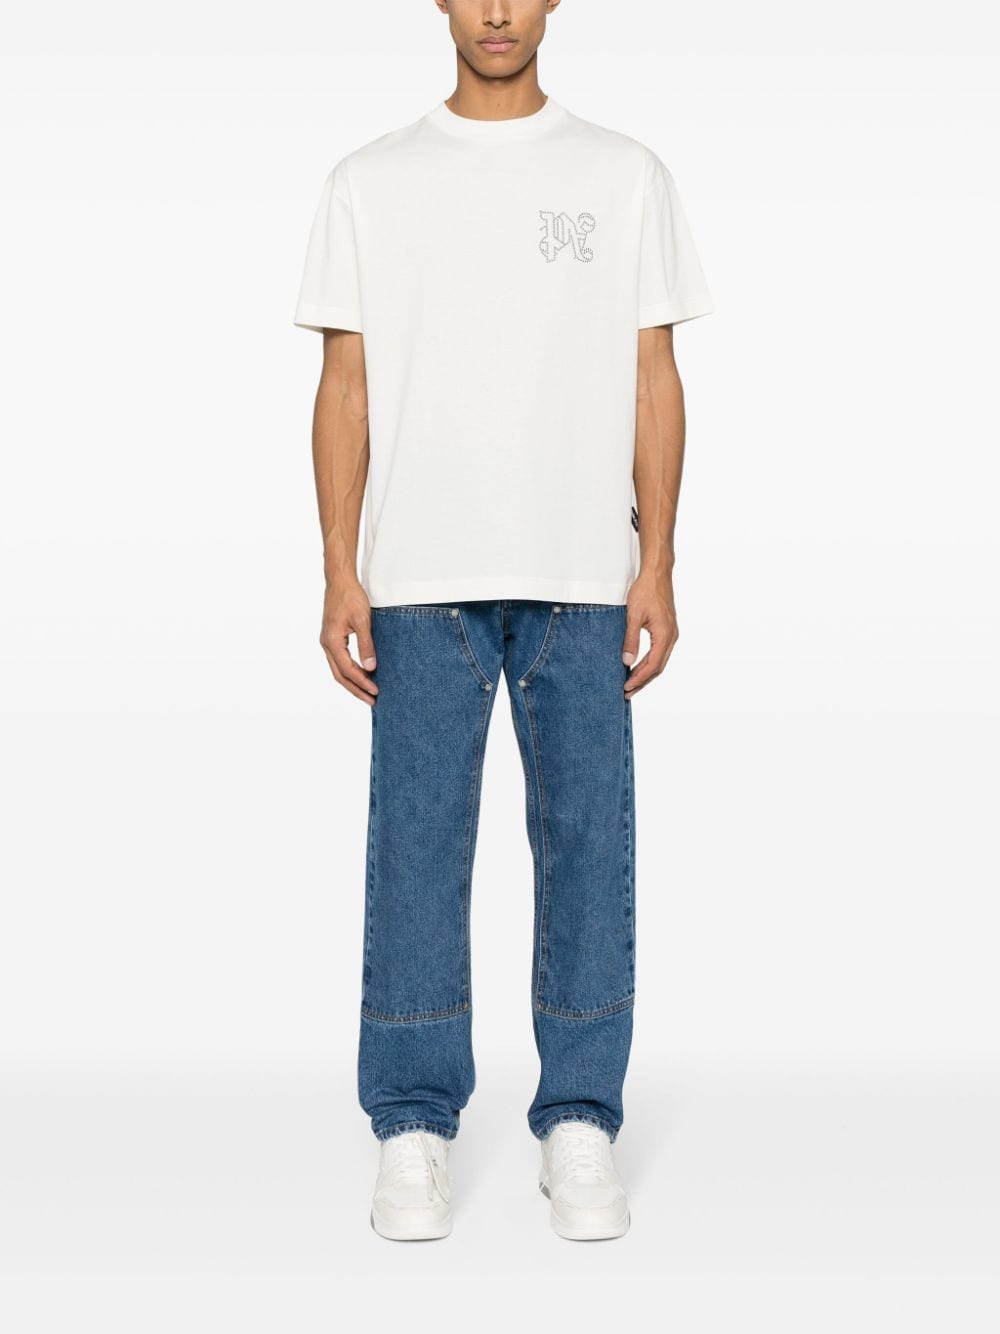 Urban Sophistication Mid-Washed Cotton Jeans for Men by Palm Angels